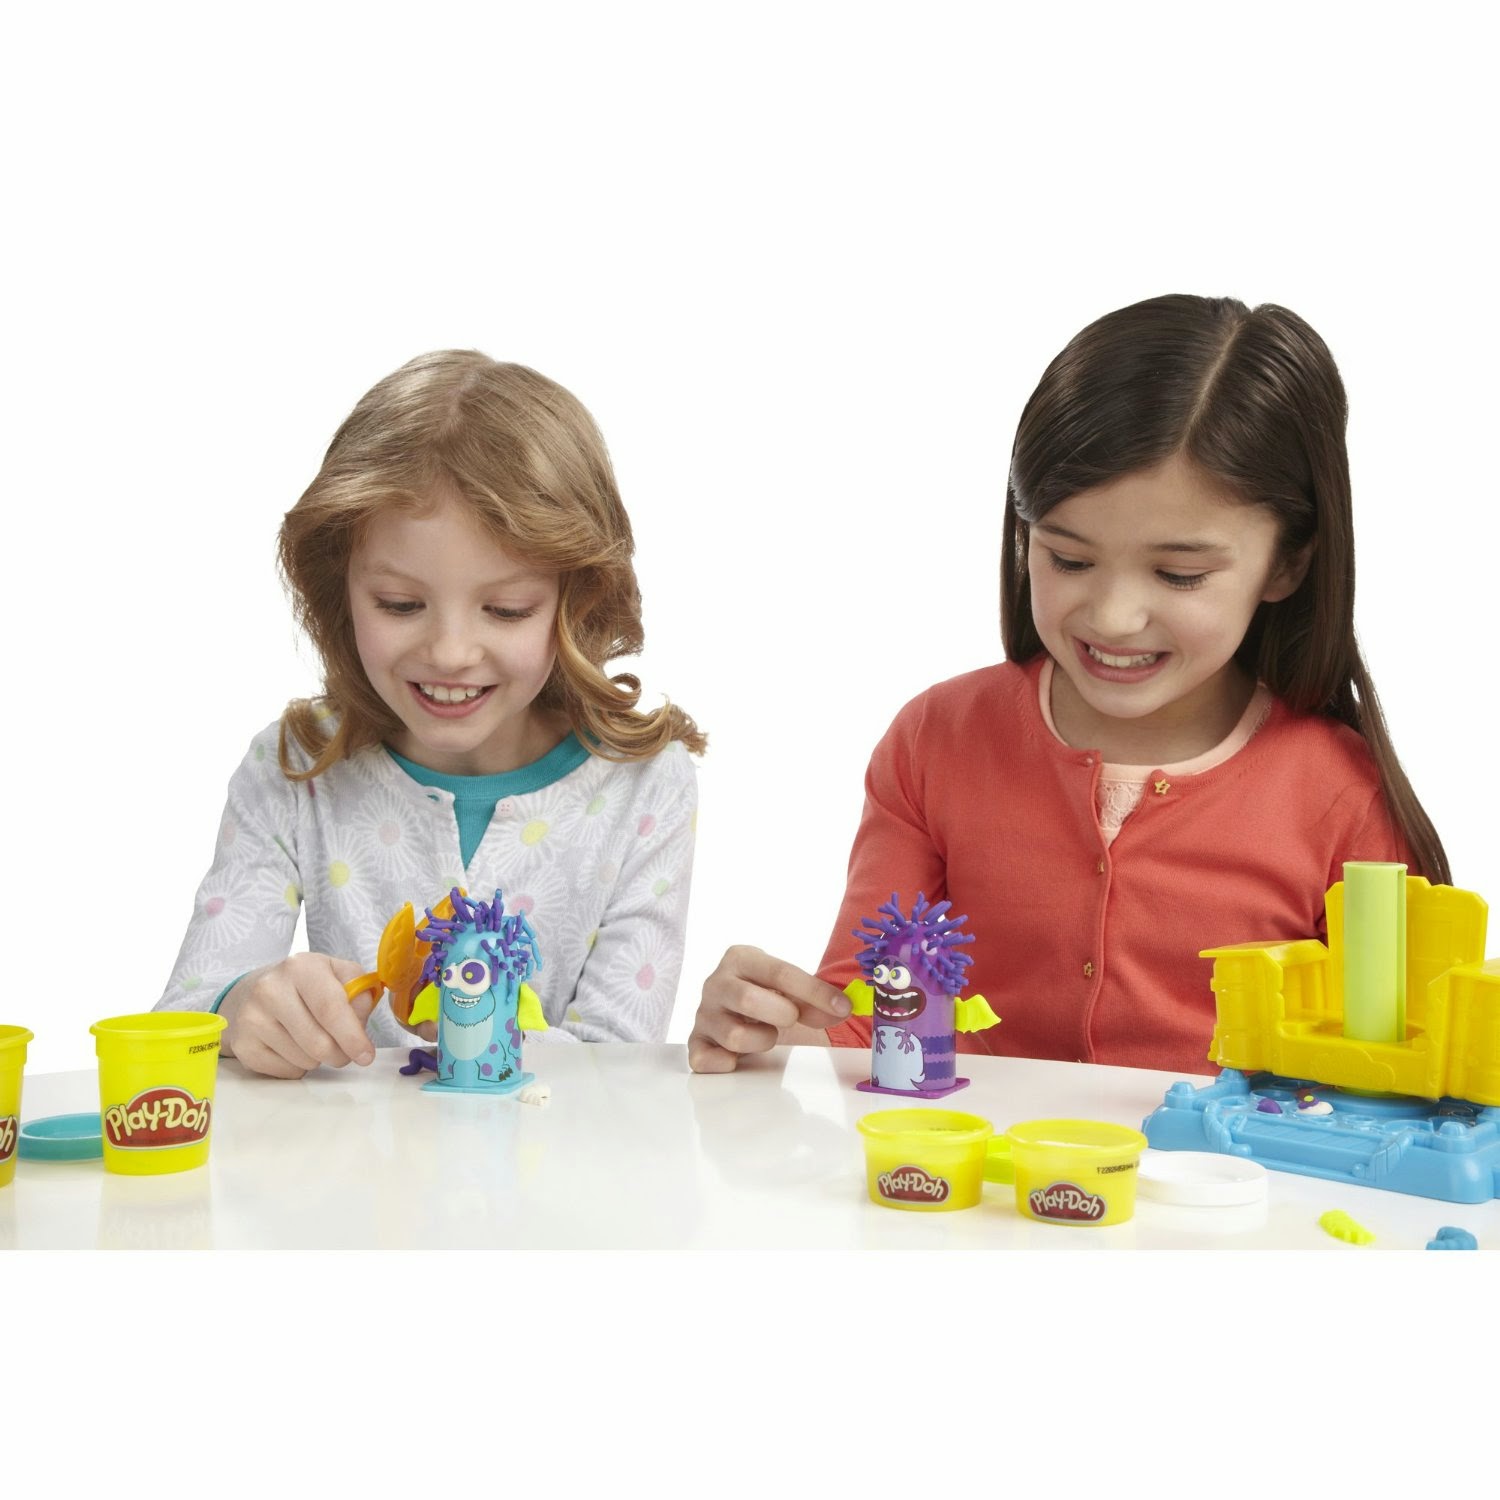 Play-Doh Scare Chair Playset